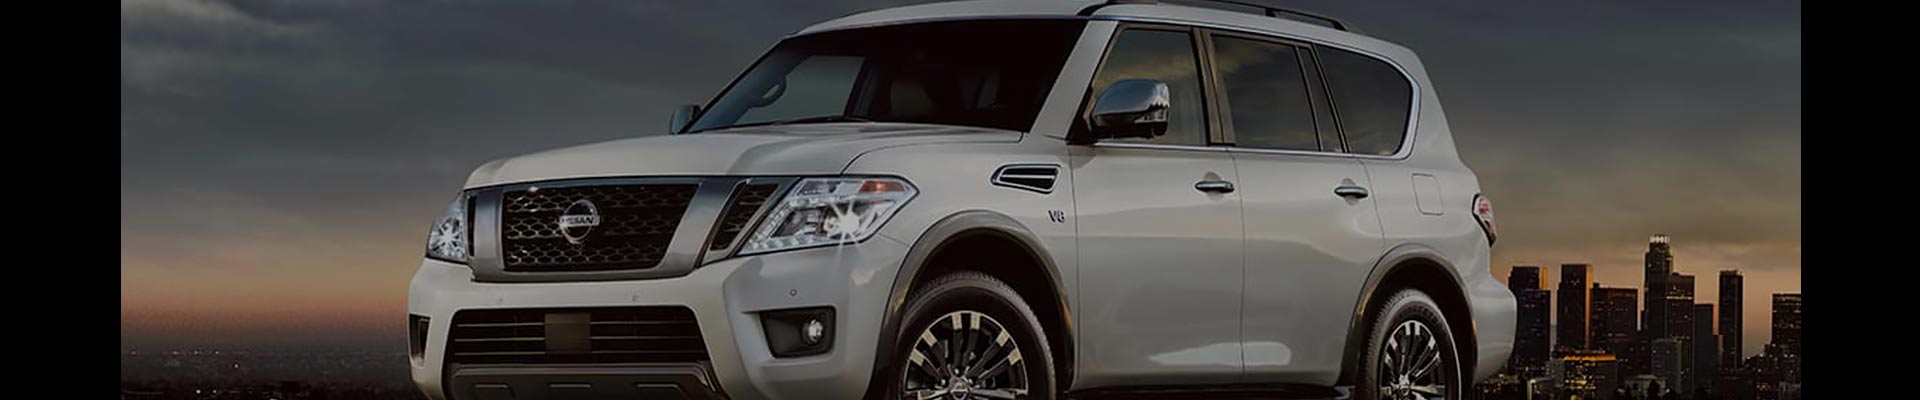 Shop Replacement and OEM 2013 Nissan Armada Parts with Discounted Price on the Net